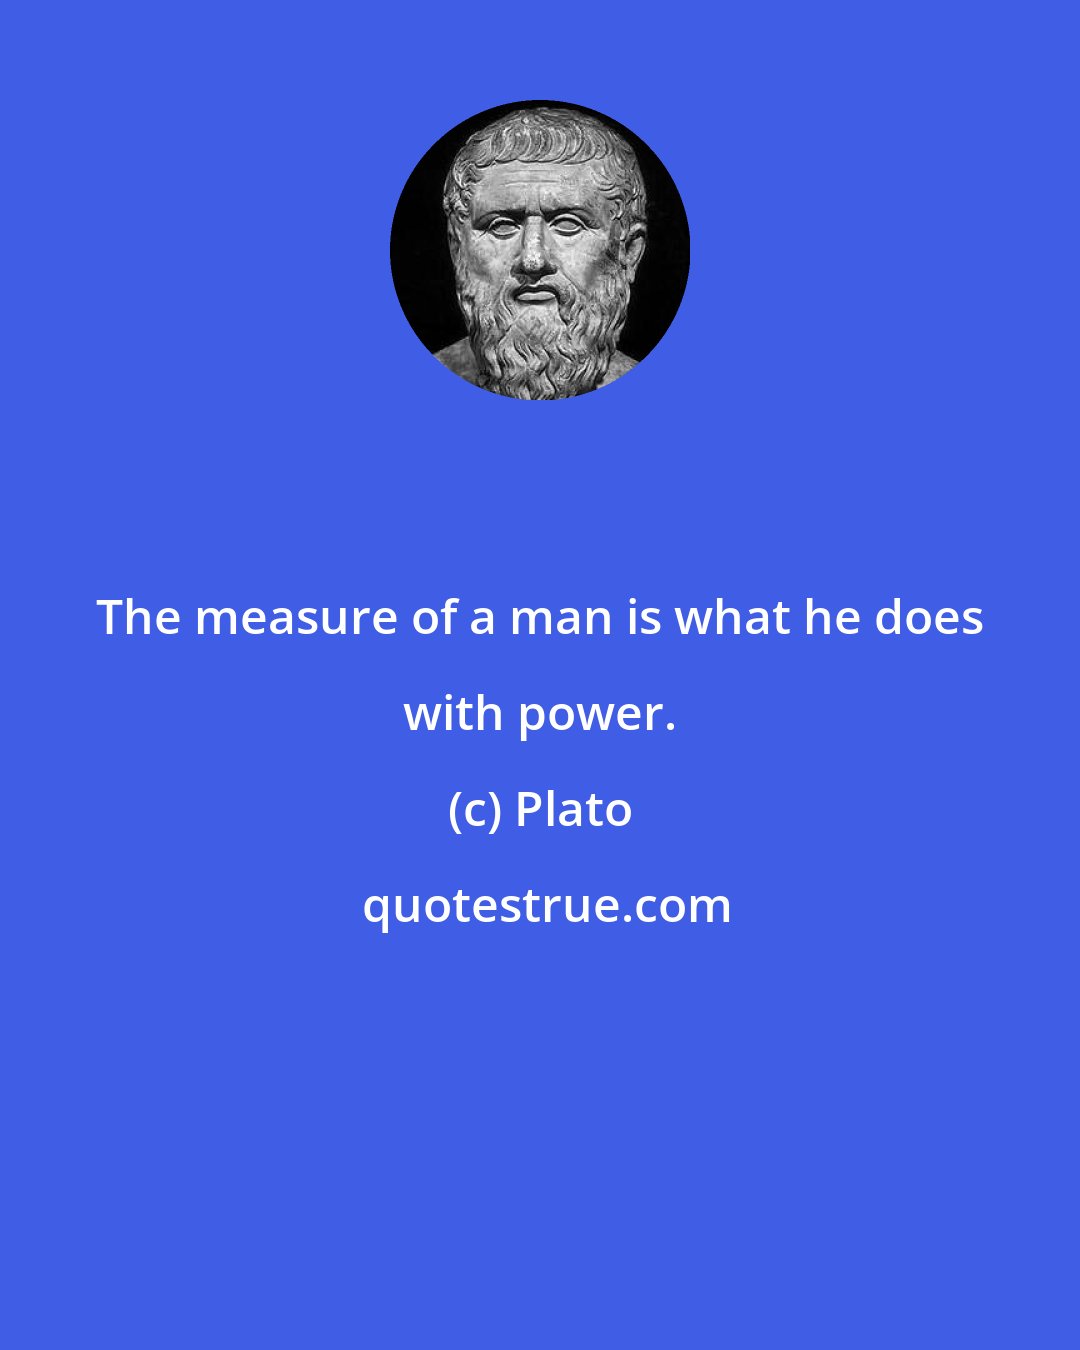 Plato: The measure of a man is what he does with power.